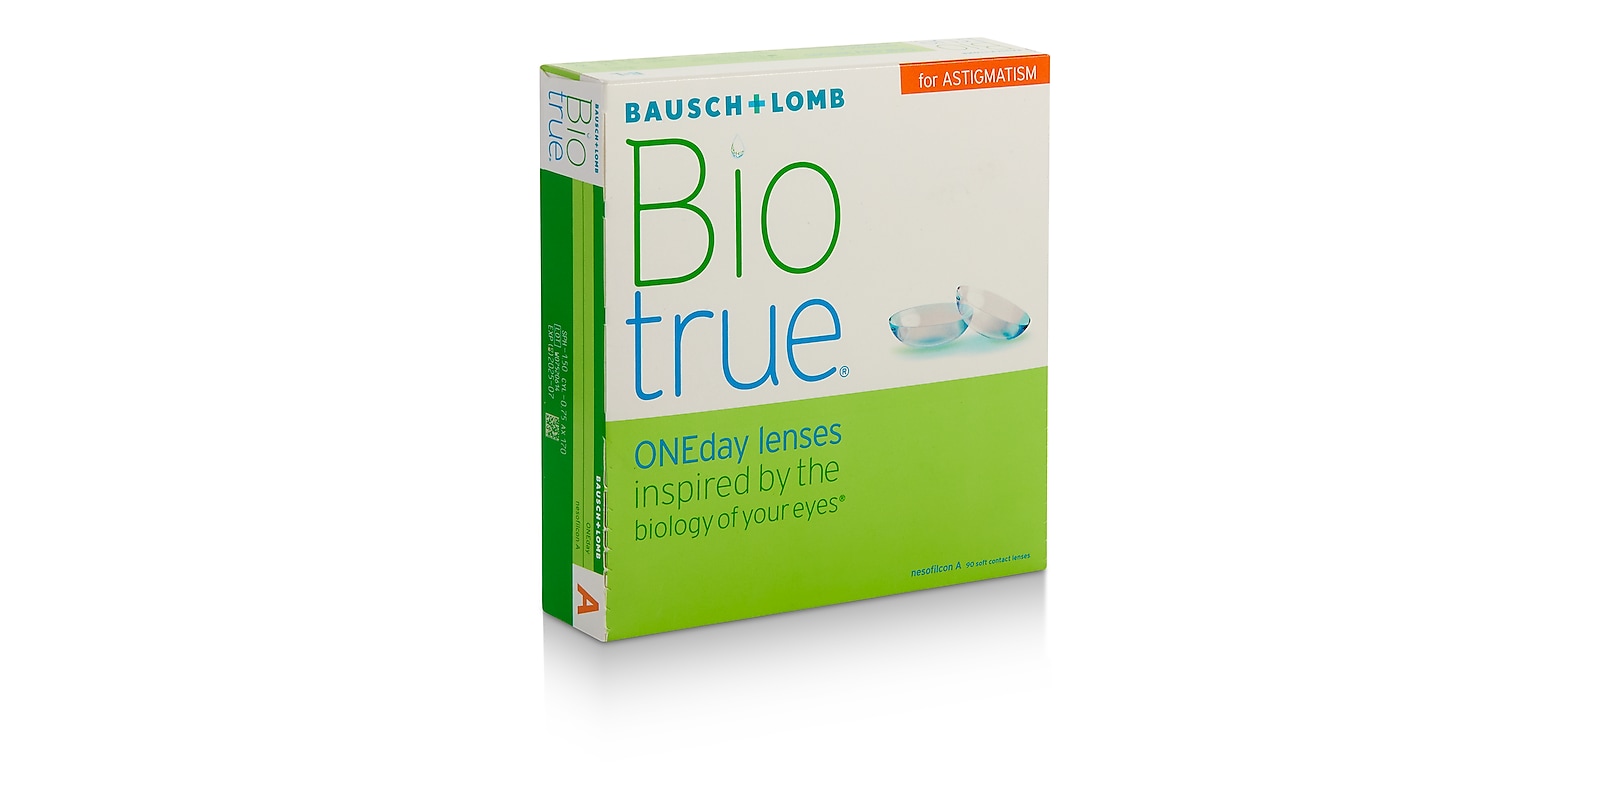 Bausch + Lomb - Biotrue Oneday For Astigmatism 90 Pk